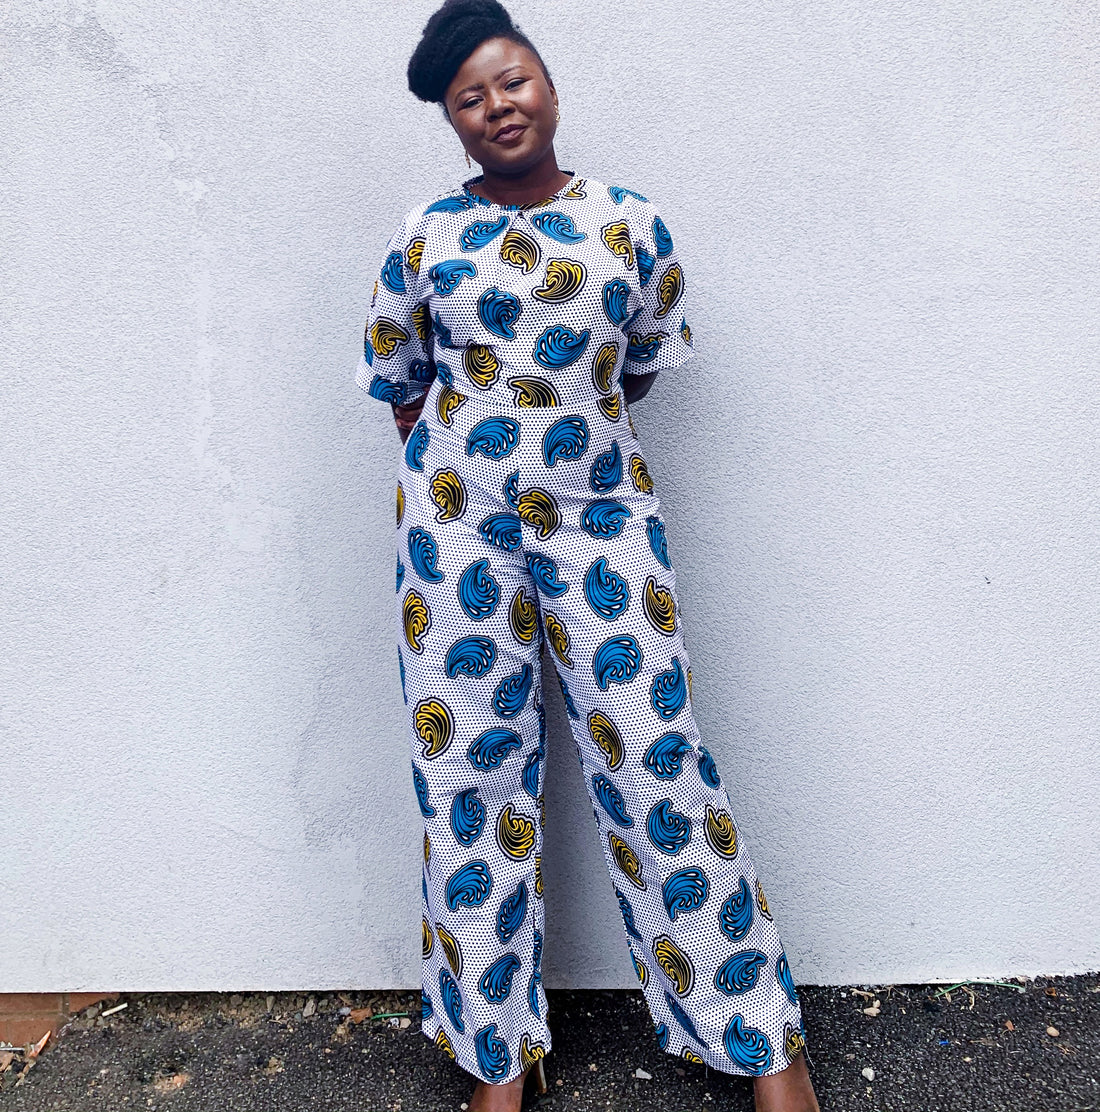 Ruth (thisnovembergurl) wearing the 'Jennifer' jumpsuit crafted with African print fabric from Dovetailed London.